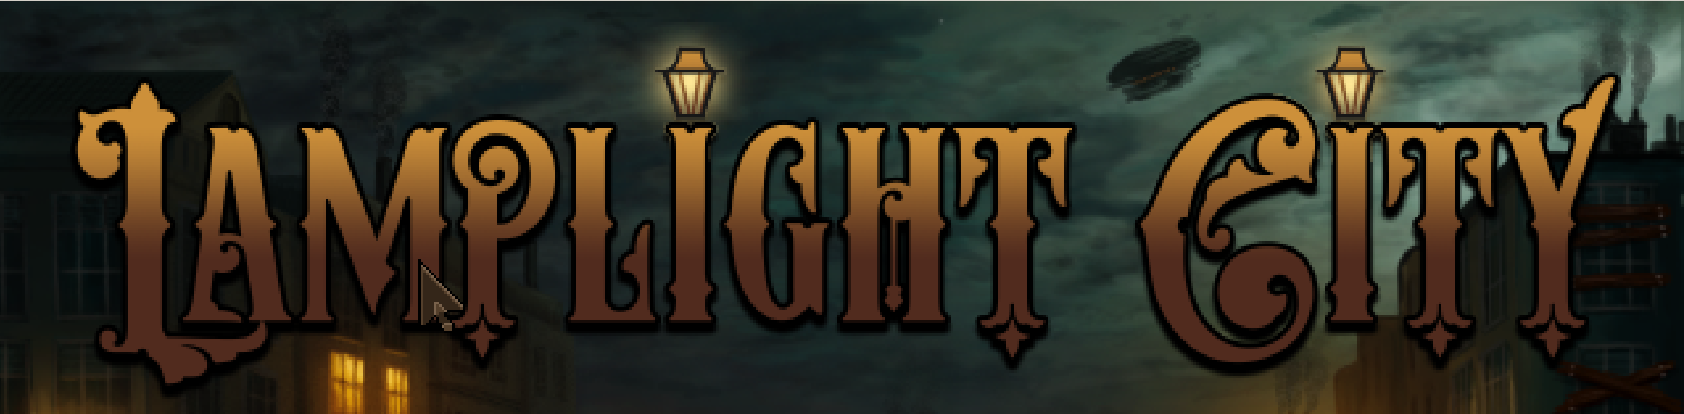 Lamplight City: More a Flicker Than a Flame